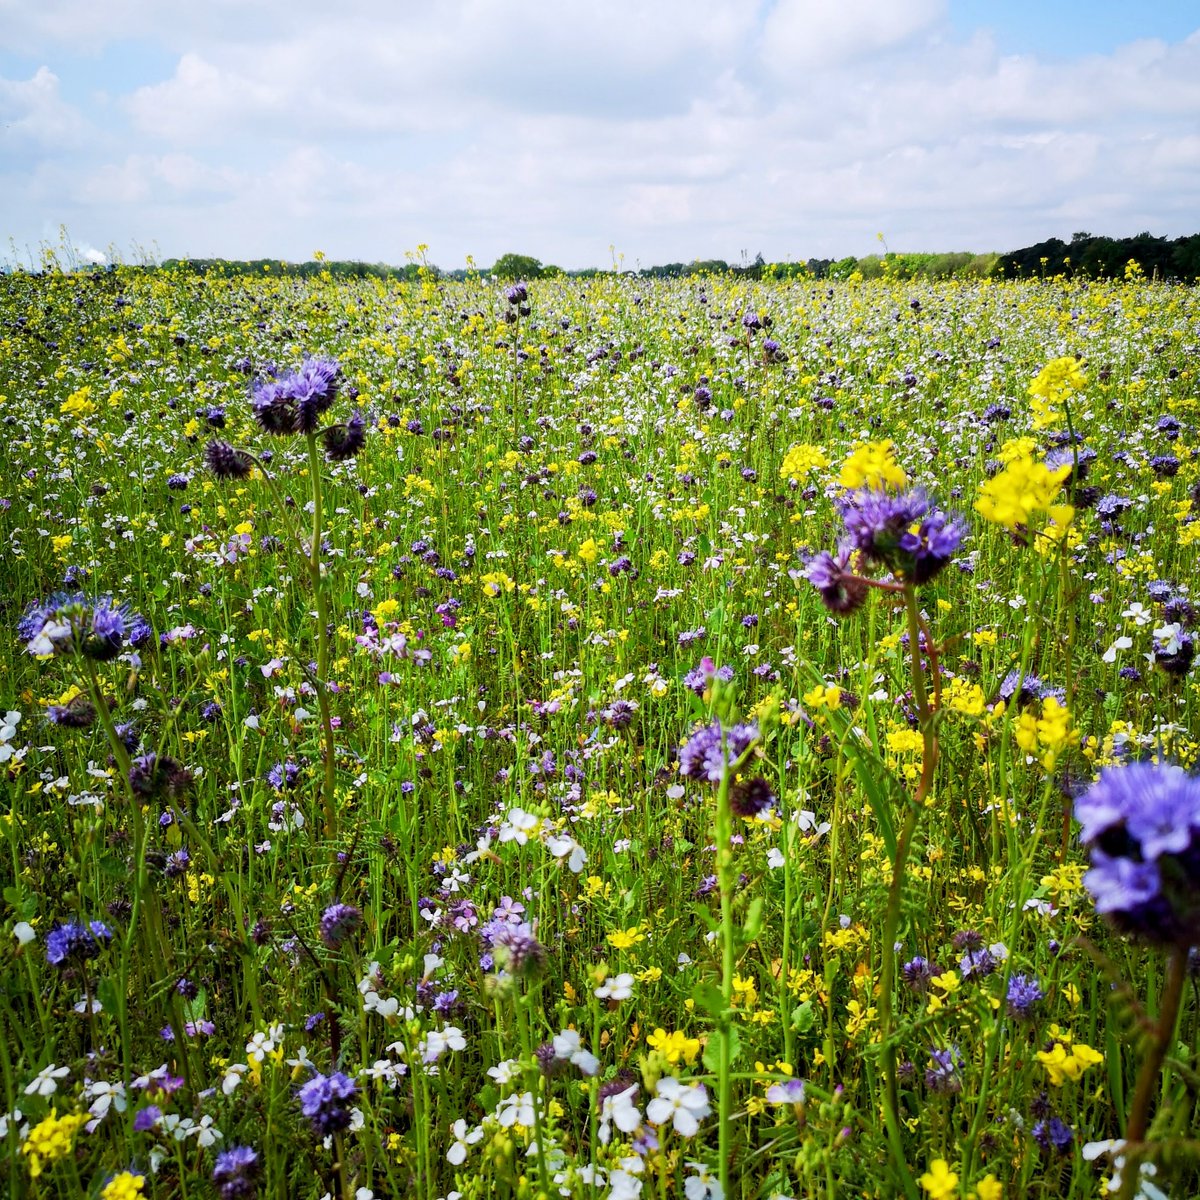 Picture perfect wildflower meadow with a wide mix of flowers for all pollinators.
#NorfolkHoneyCo
#StewartSpinks
#BeekeepingForAll
#Beekeeping
#Honeybees
#BeeFarmer